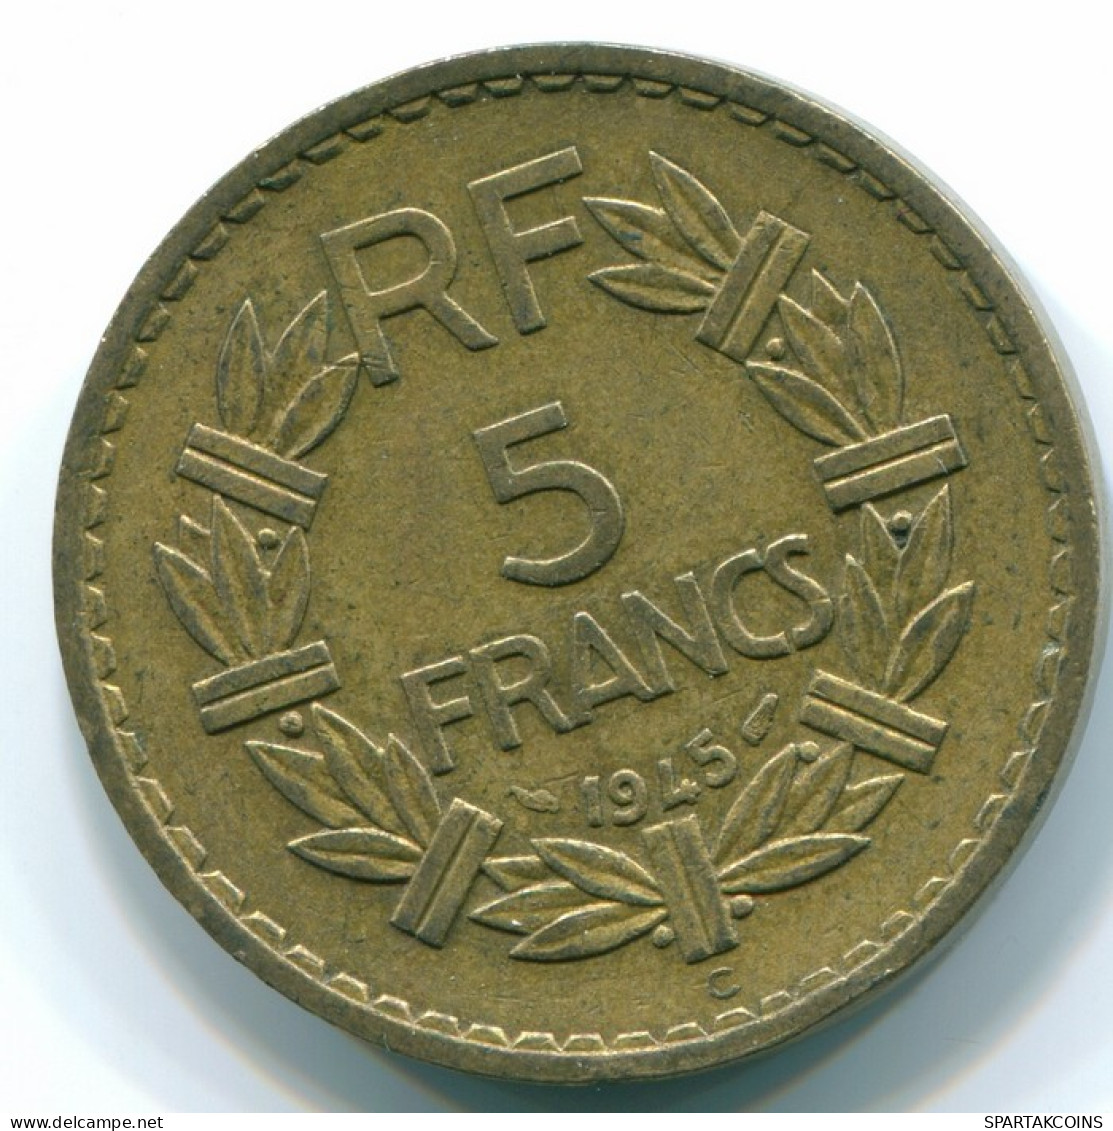 5 FRANCS 1945 FRANCE Pièce COLONIAL FOR USE IN AFRICA Lavrillier XF #FR1021.28.F - 5 Francs